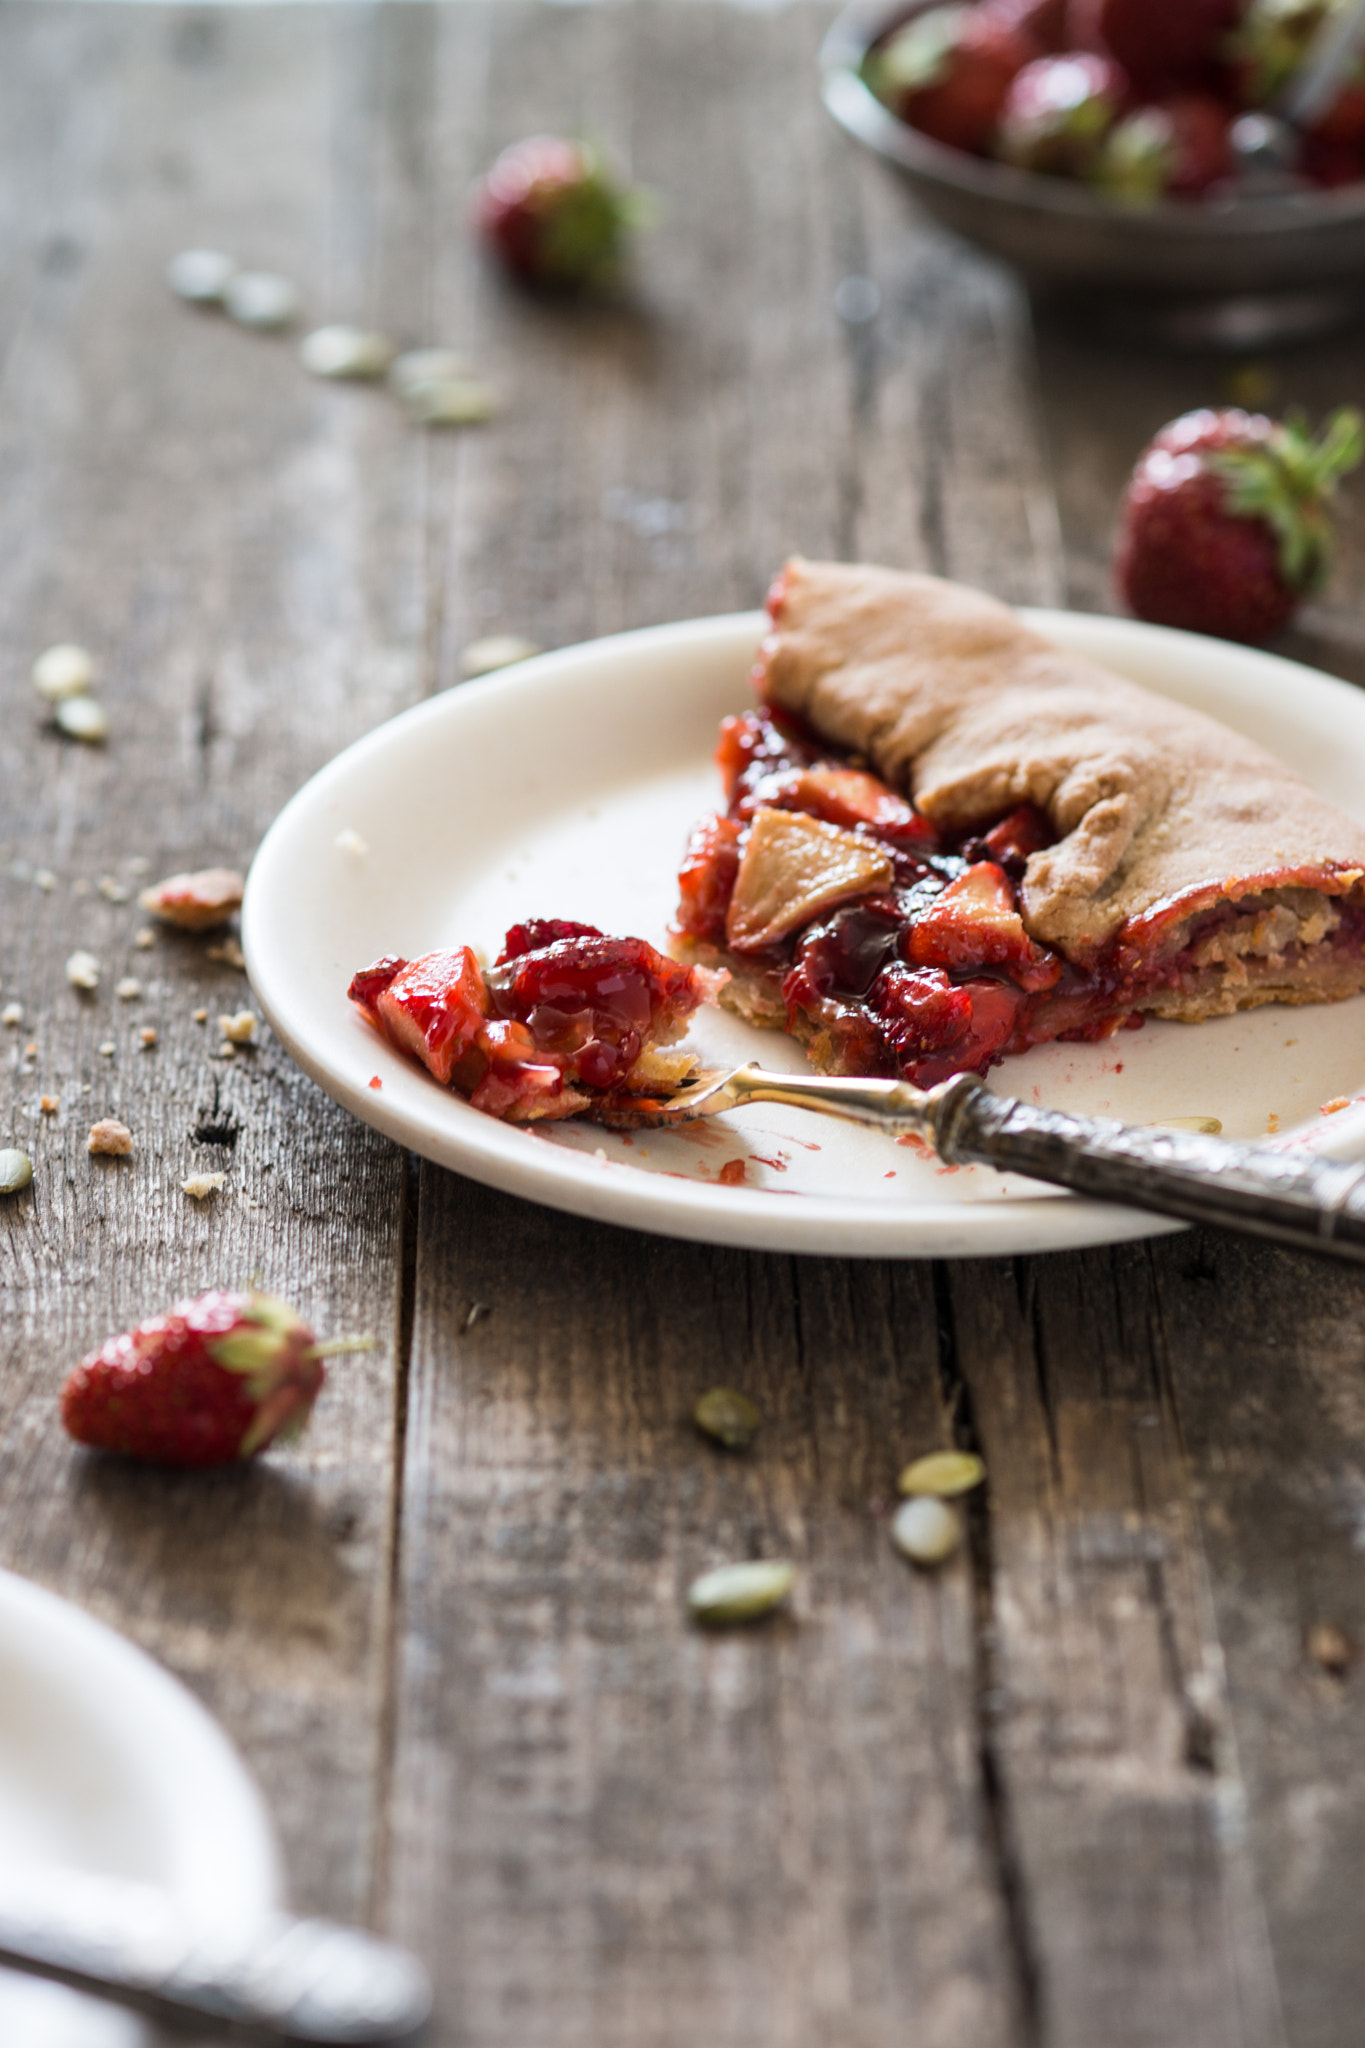 Sony a99 II sample photo. Strawberry galette rustic style photography